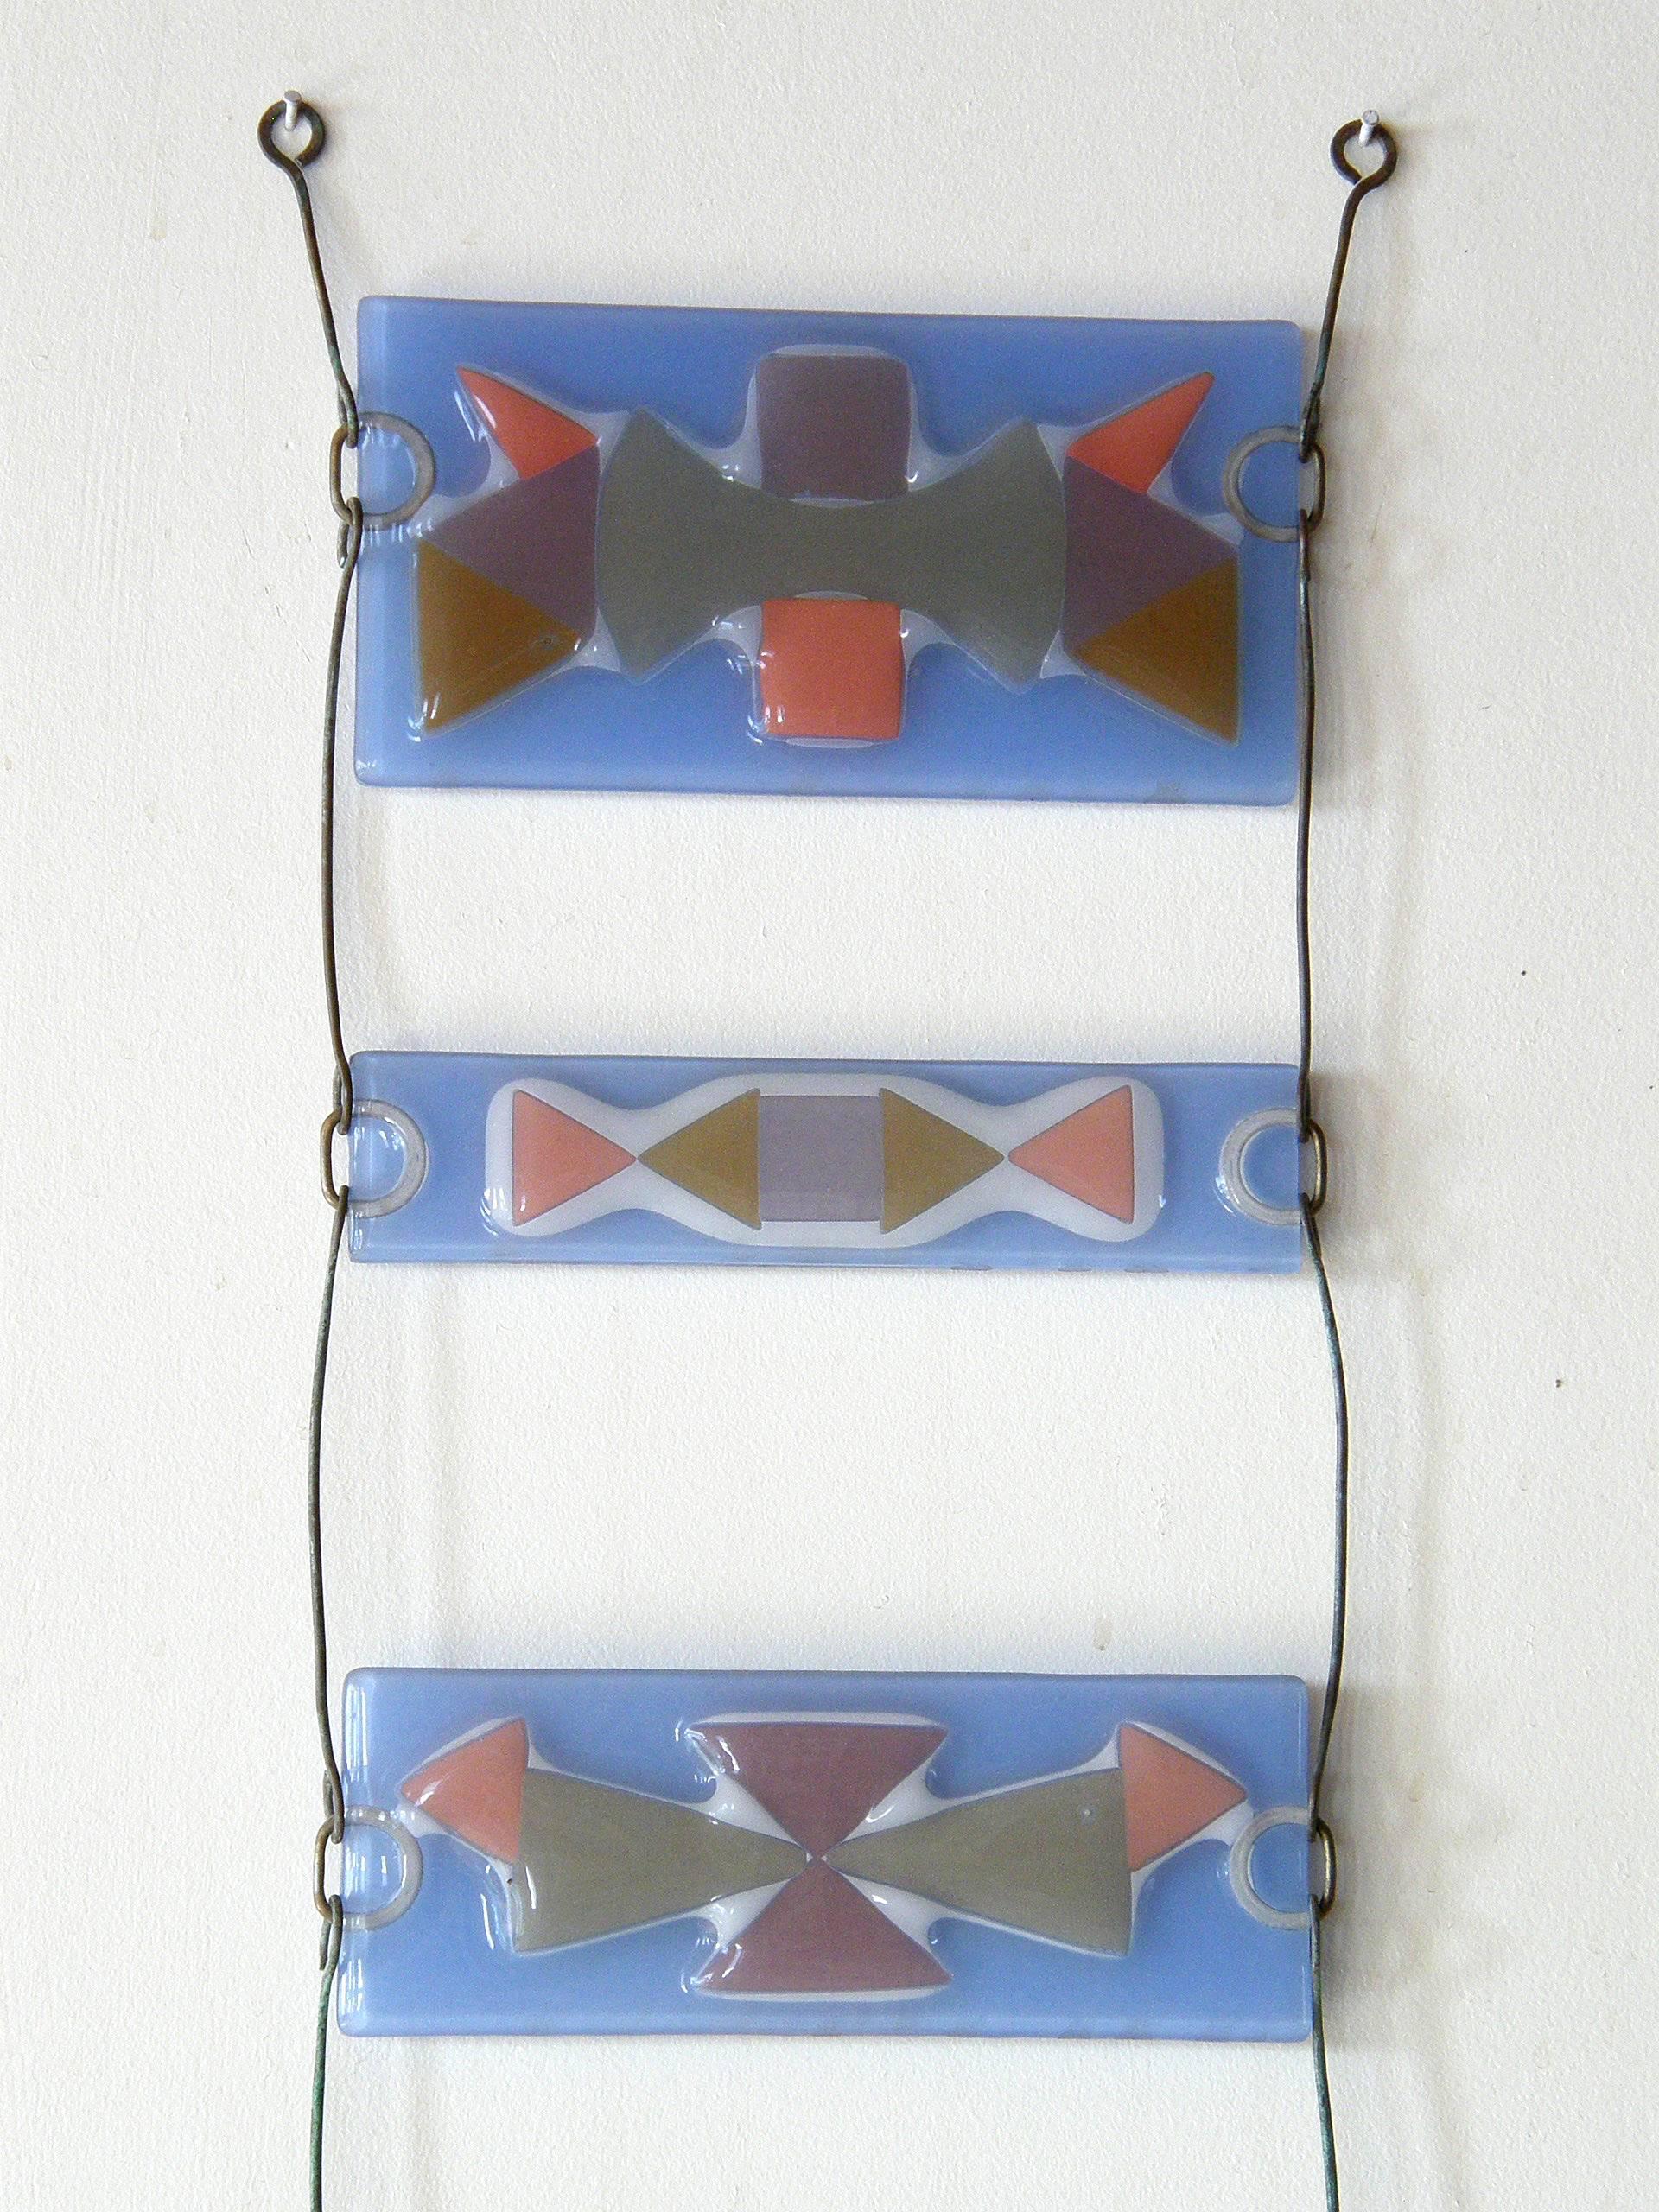 This colorful, fused glass wall pocket was made at the Higgins Glass Studio. It is likely one of Michael's designs since it utilizes pieces of colored glass arranged between sheets of other glass. Michael favored this technique which beautifully